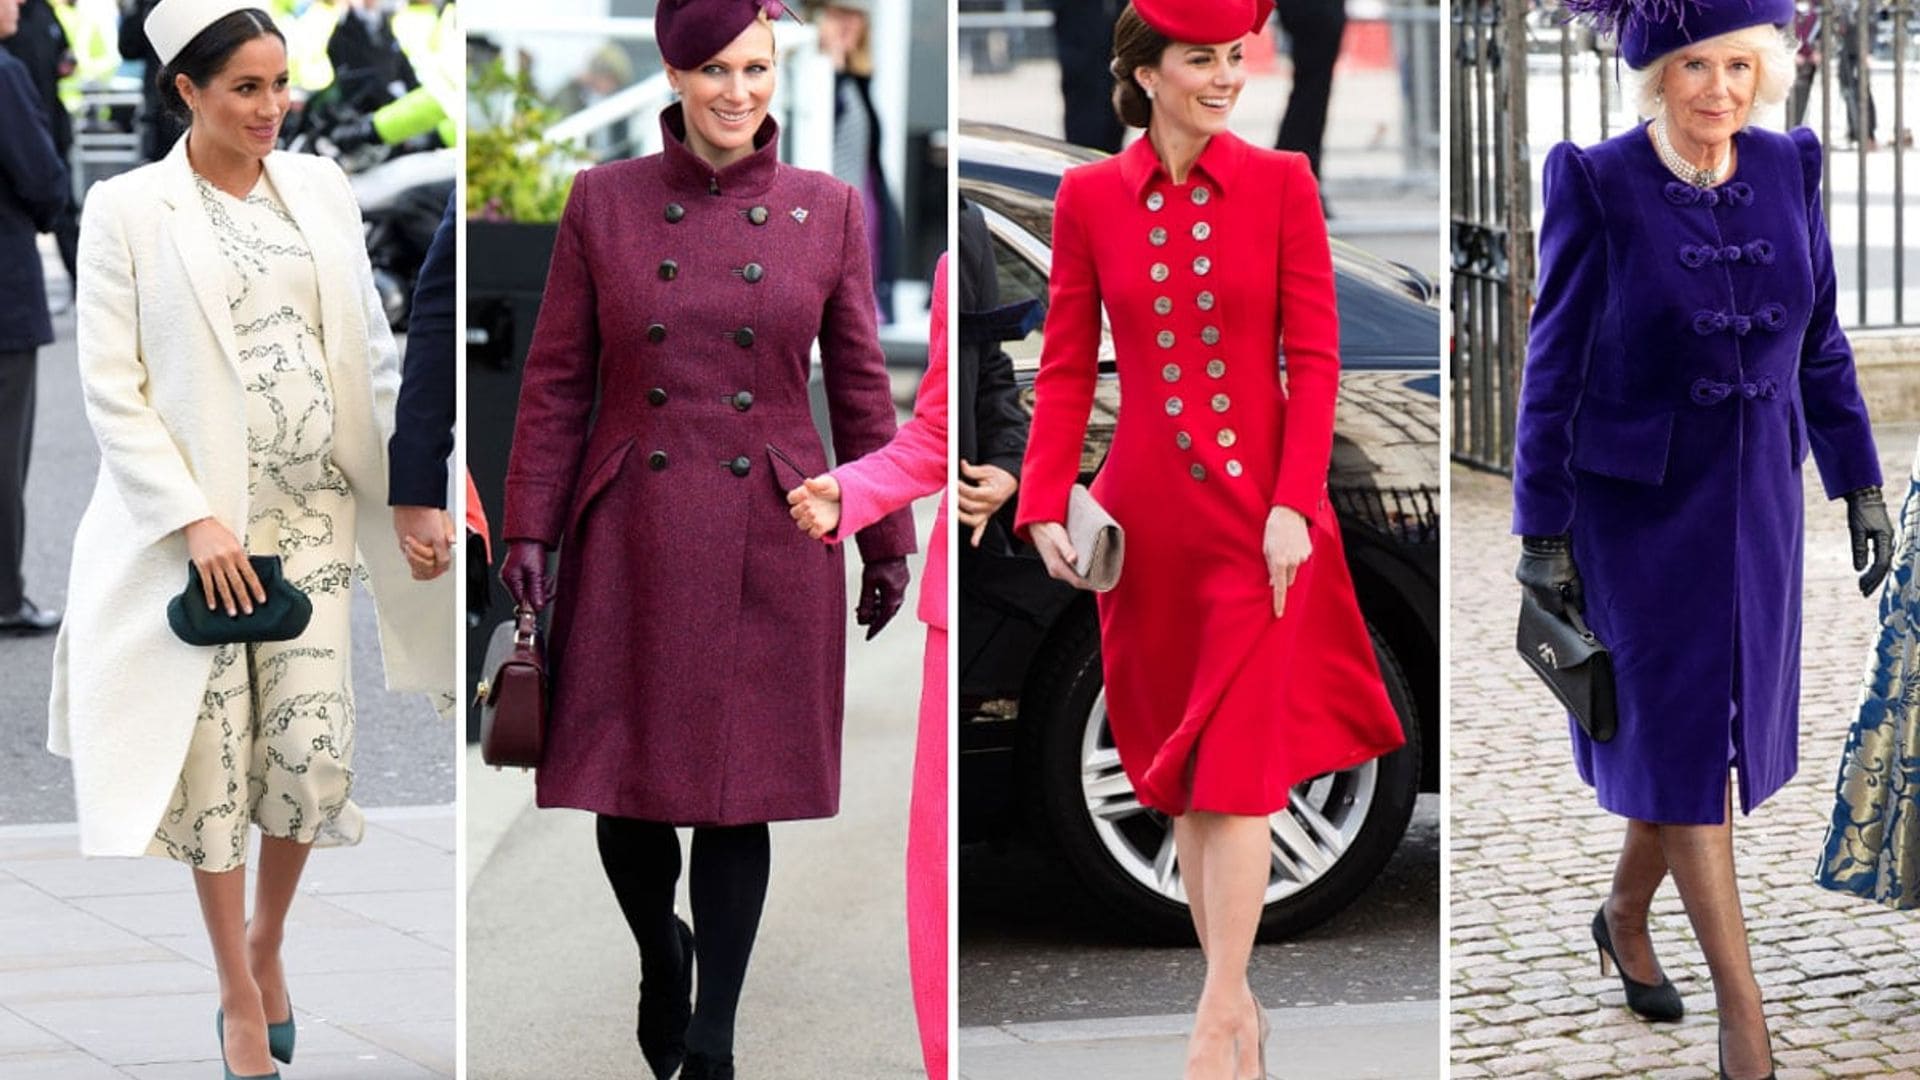 Hats off to the royal ladies: See what regal fashionistas wore this week